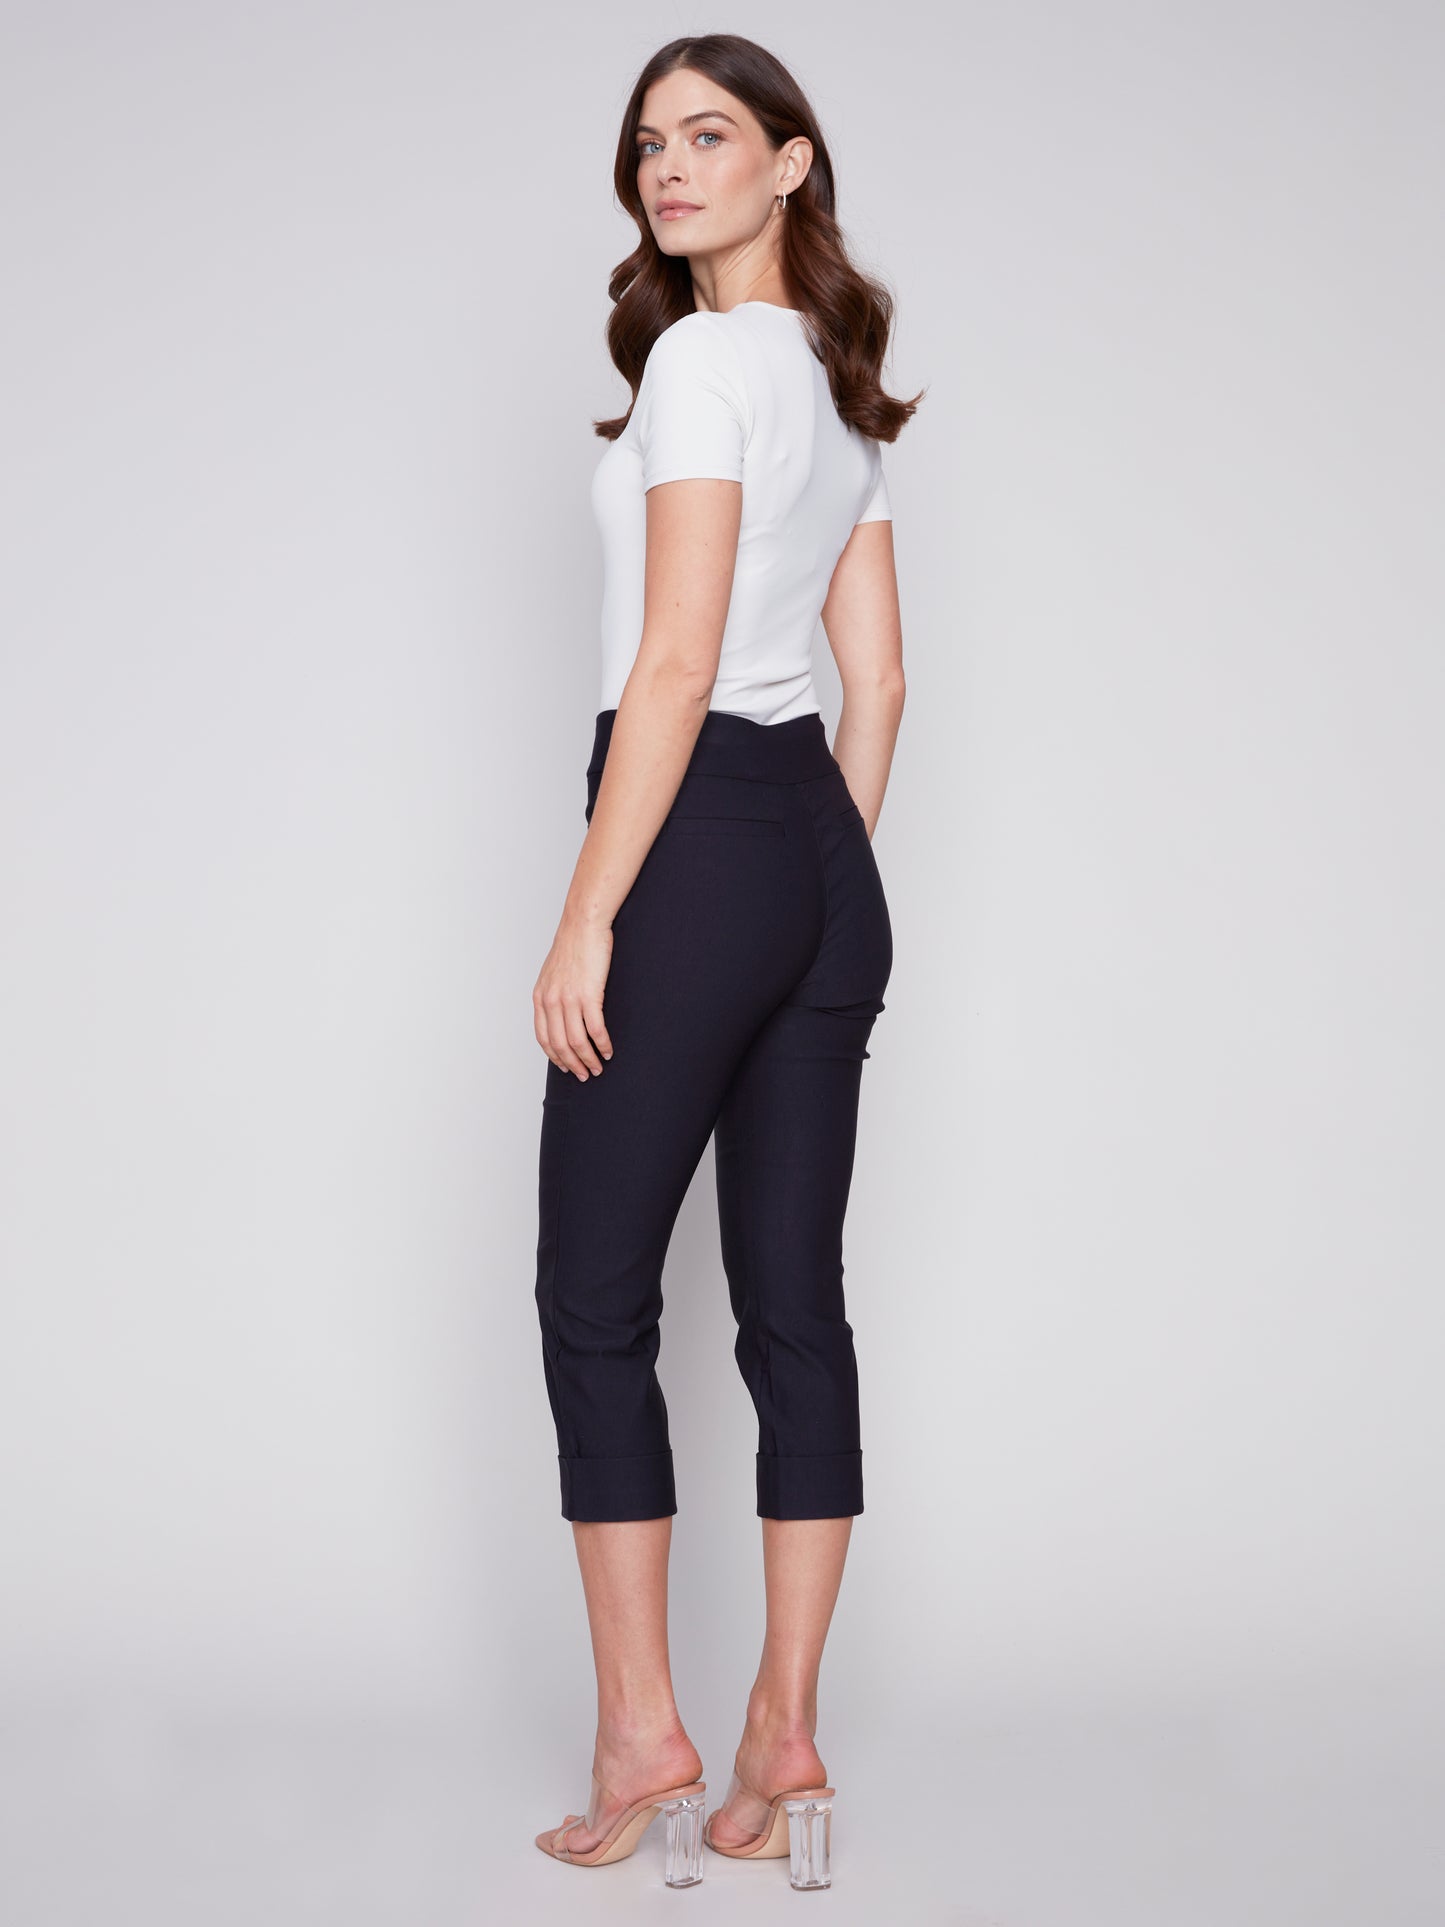 A woman showcasing her stylish Charlie B Stretch Pull-on Capri pants paired with a simple white t-shirt, perfectly balancing style and functionality.